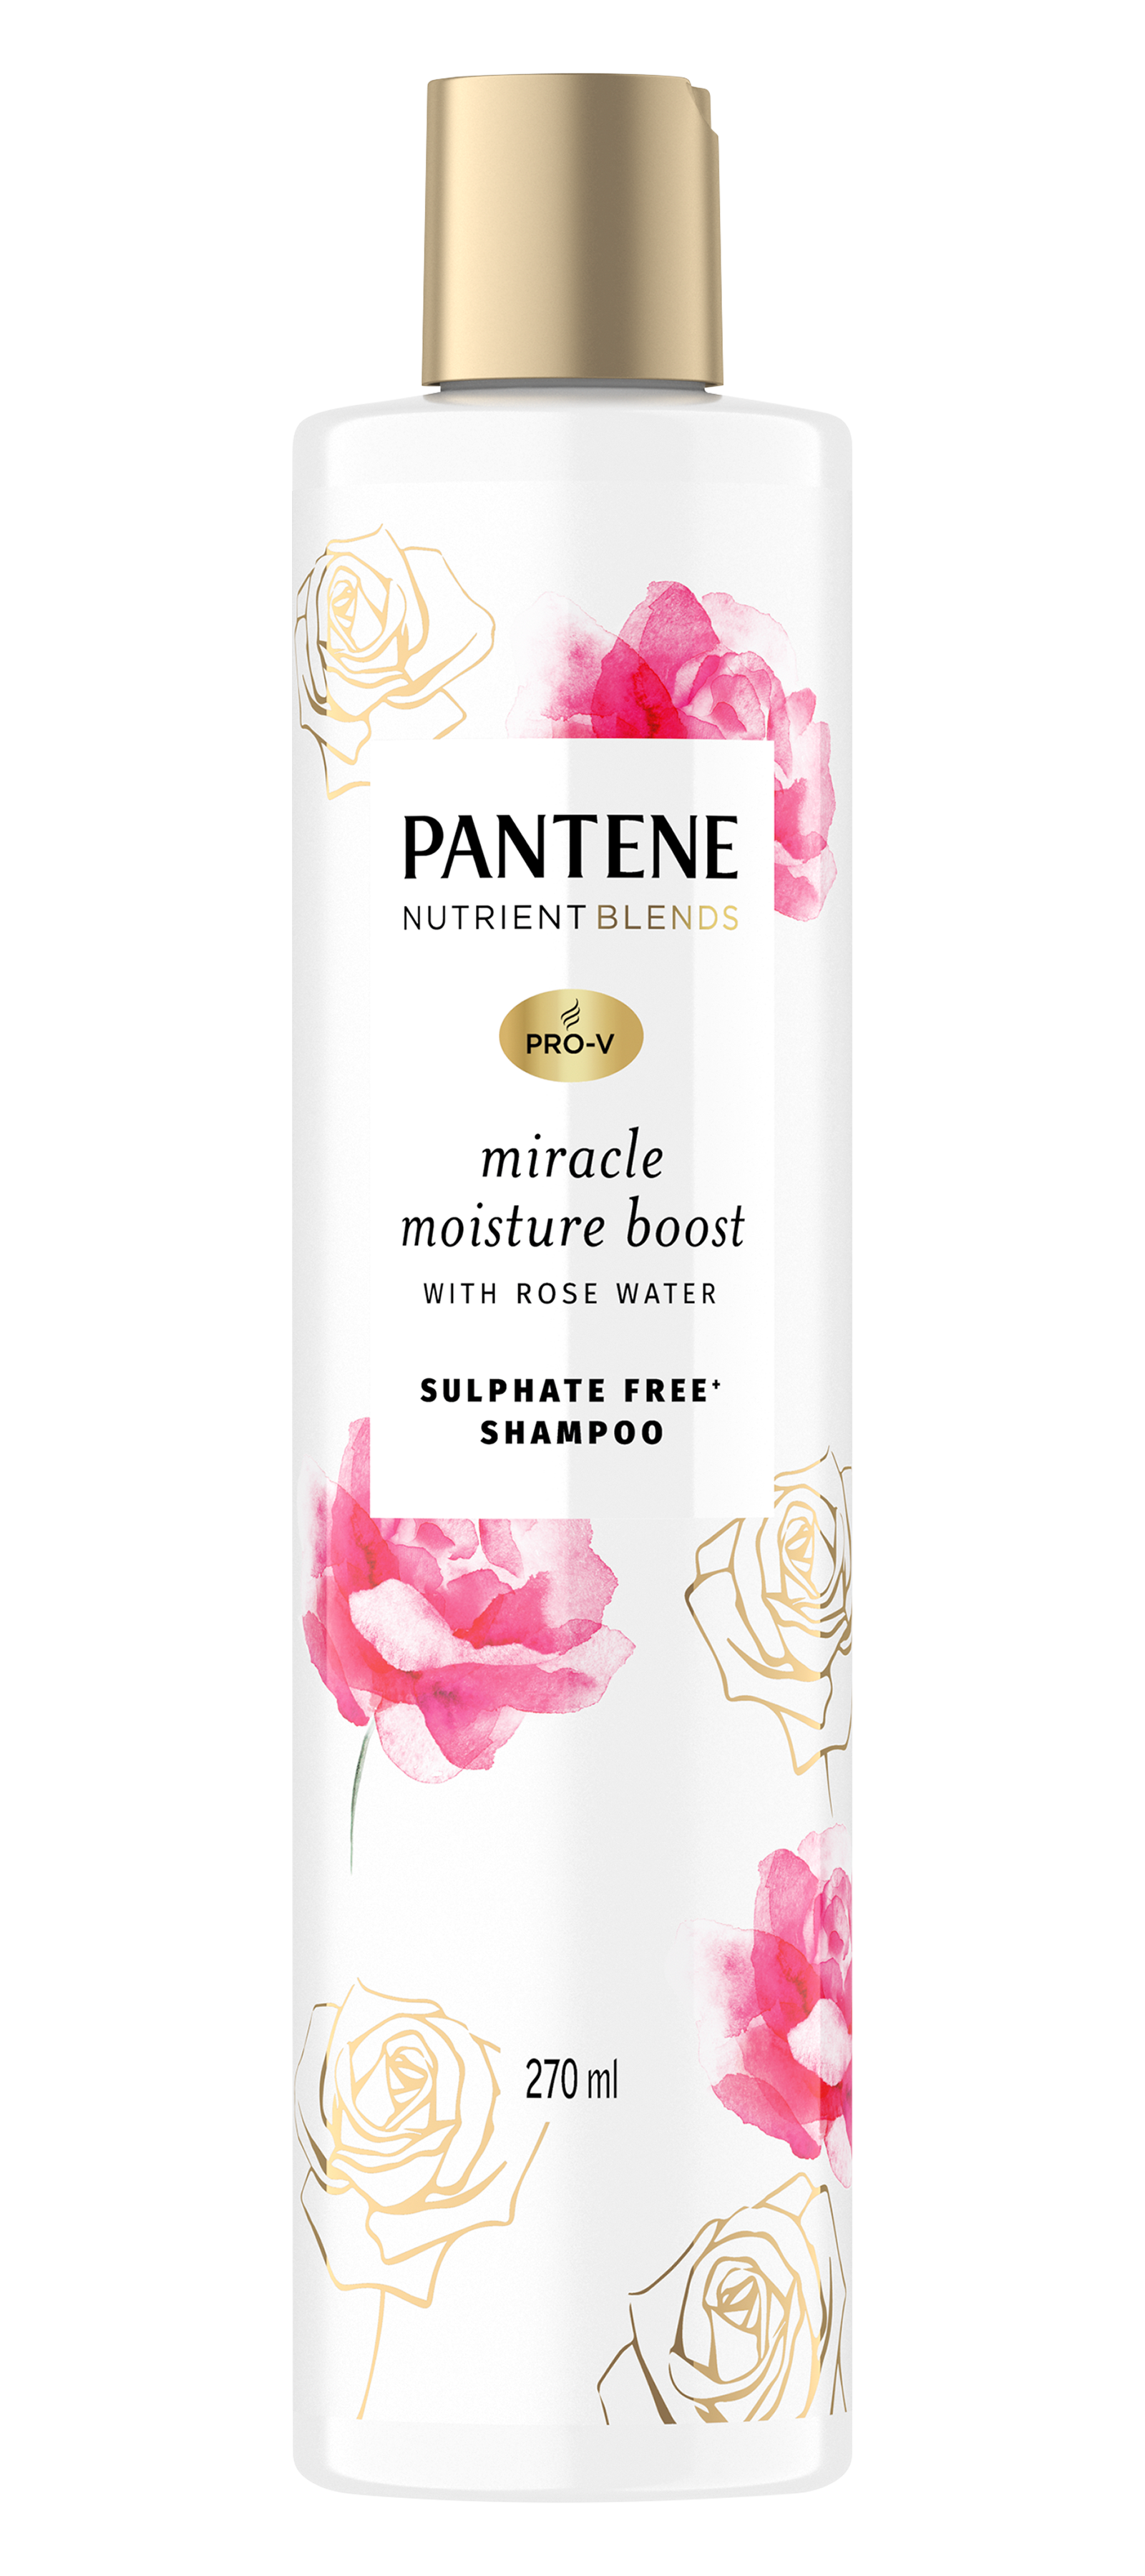 Pantene Nutrient Blends Miracle Moisture Boost Shampoo with Rosewater